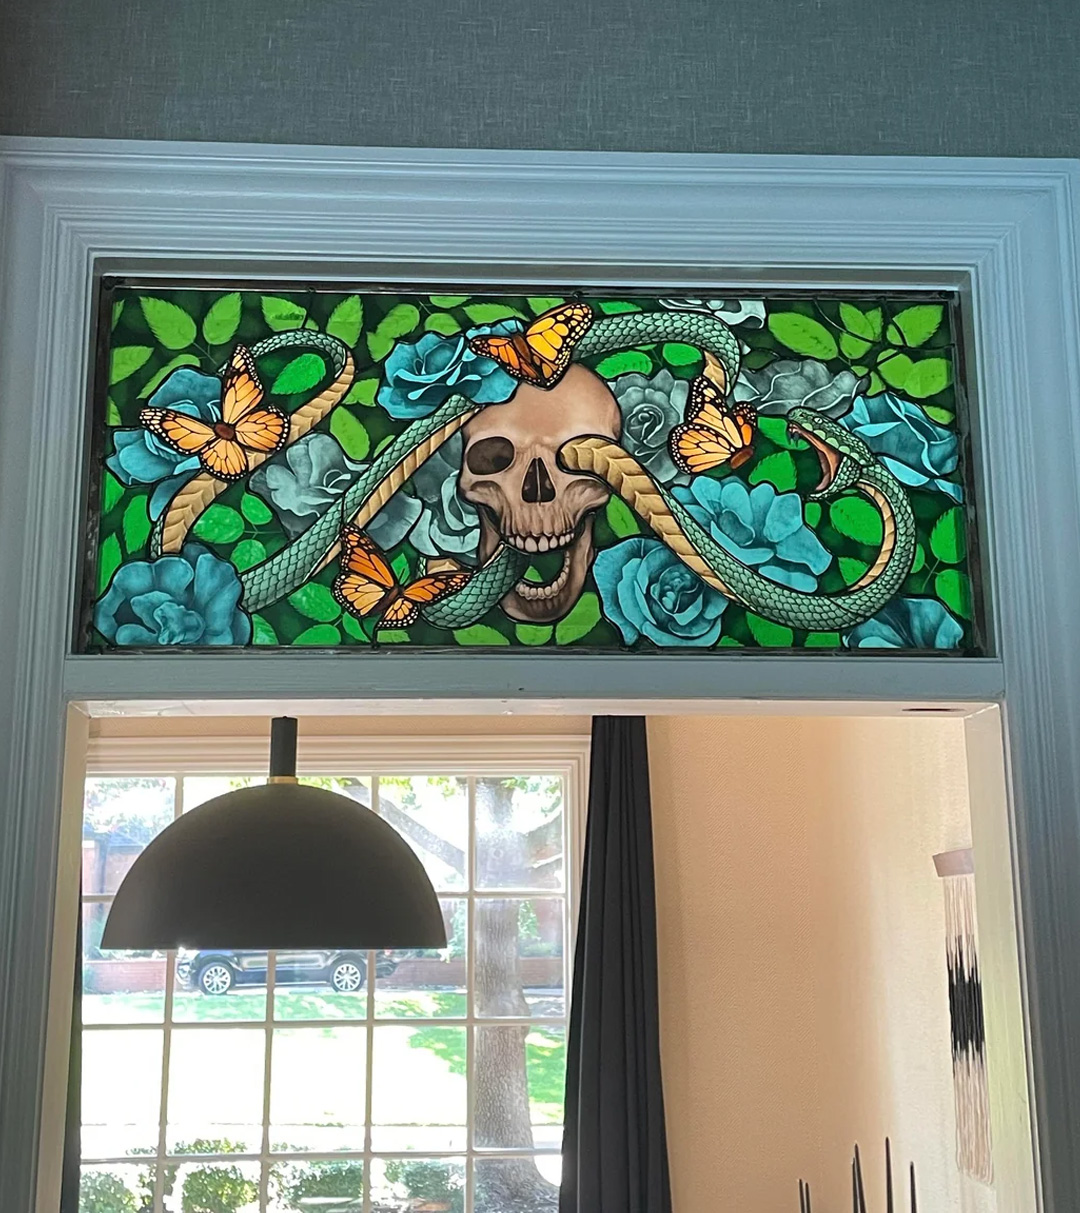 A homemade stained glass window.